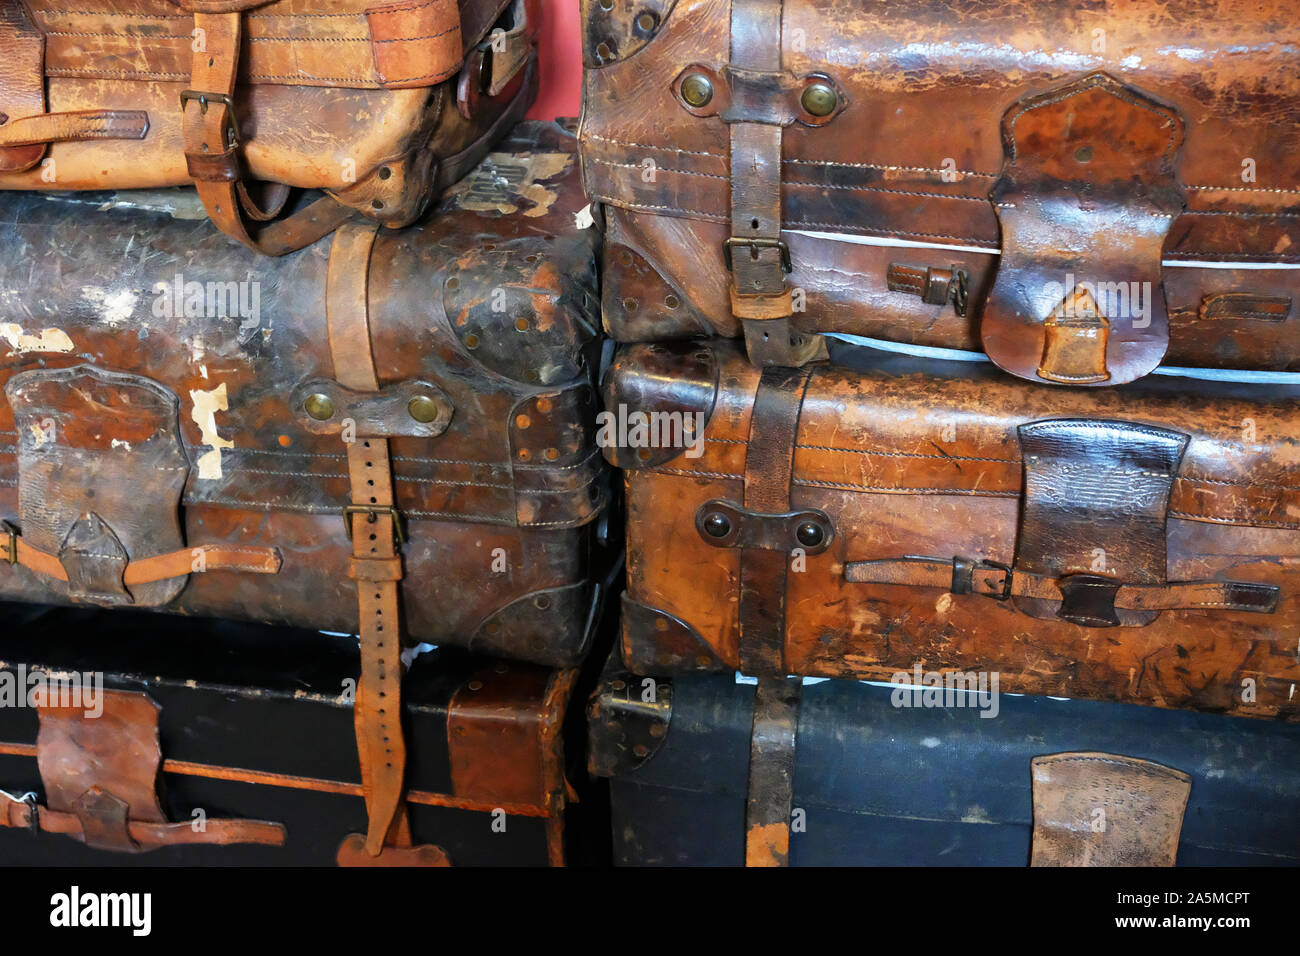 A stack of old leather suitcases - John Gollop Stock Photo